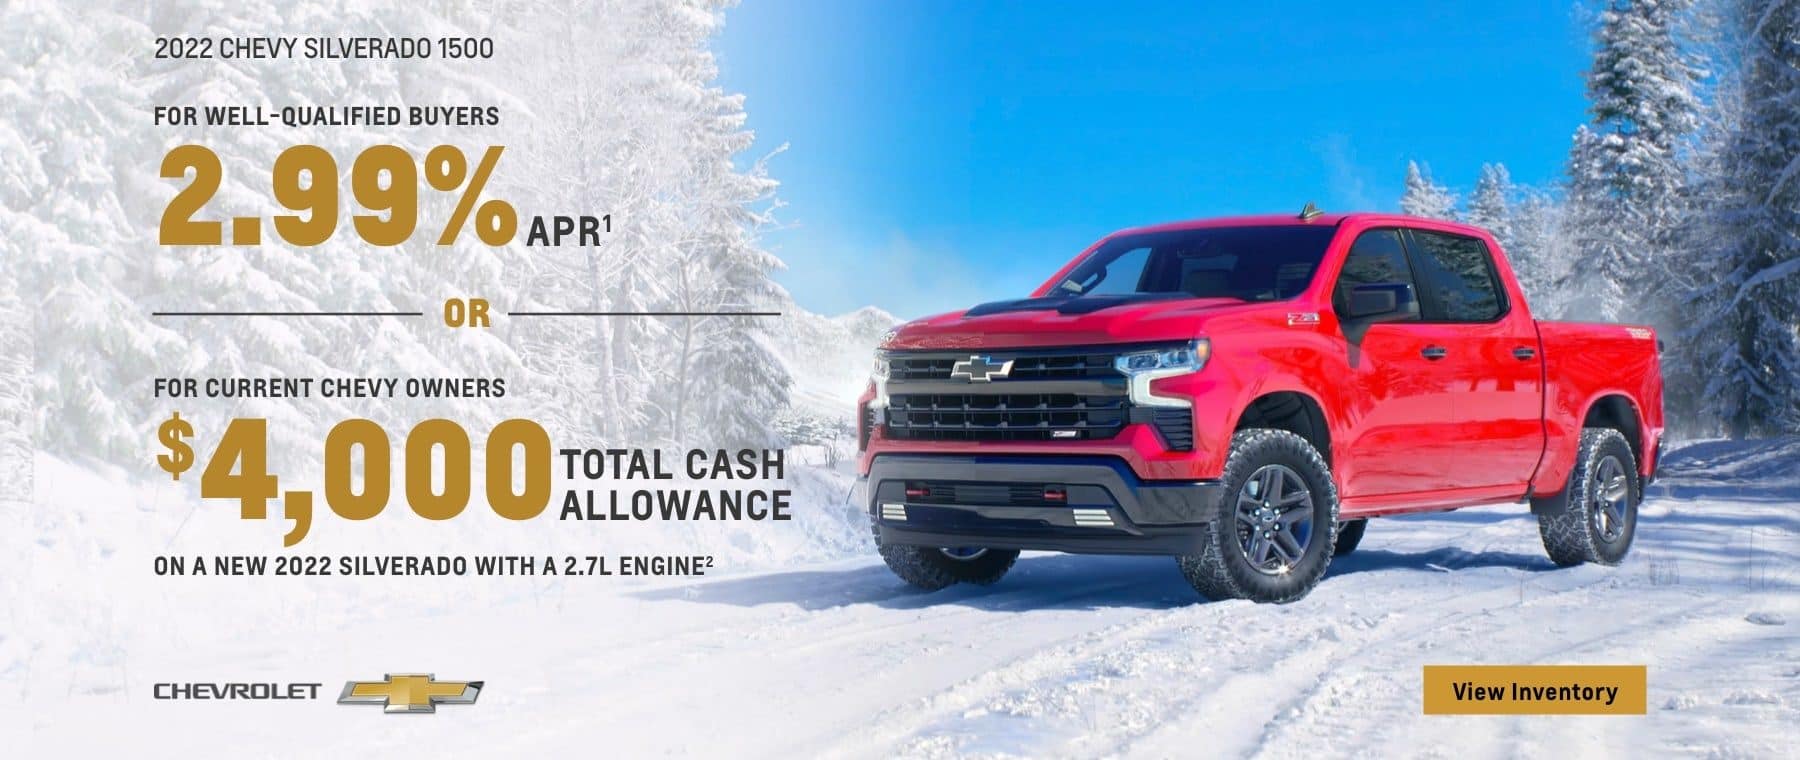 2022 Chevy Silverado 1500. For well-qualified buyers 2.99% APR. Or, for current Chevy owners $4,000 total cash allowance on a new 2022 Silverado with a 2.7L engine.